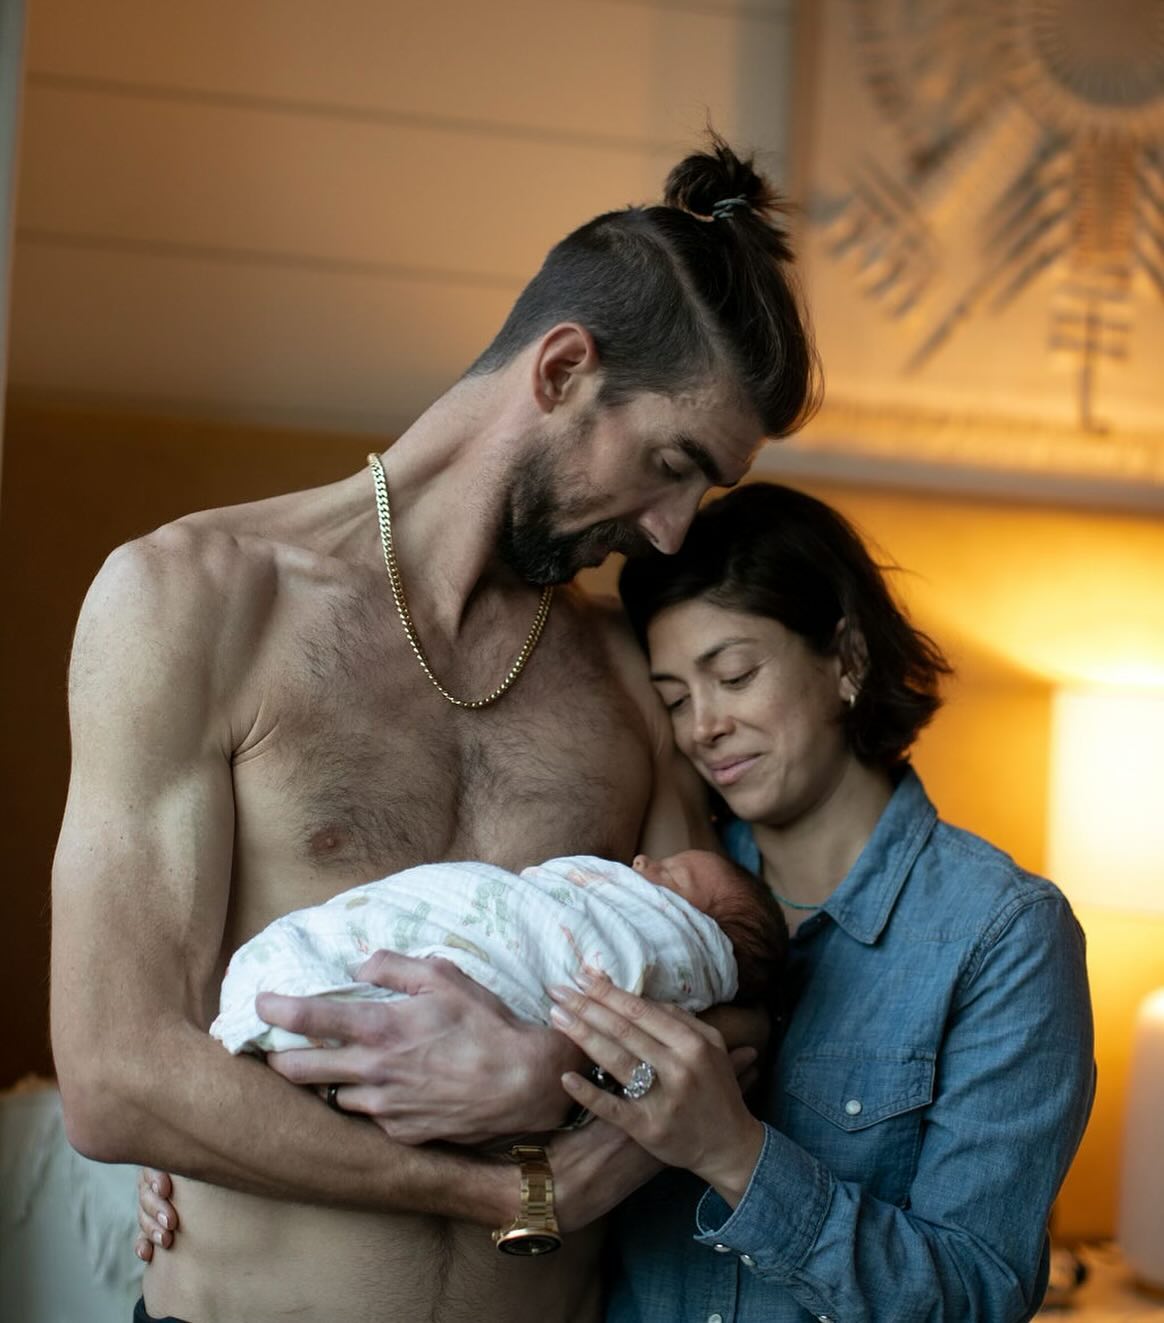 Michael Phelps welcomes 4th child with wife Nicole Johnson as Olympian reveals new baby’s name in sweet first photo